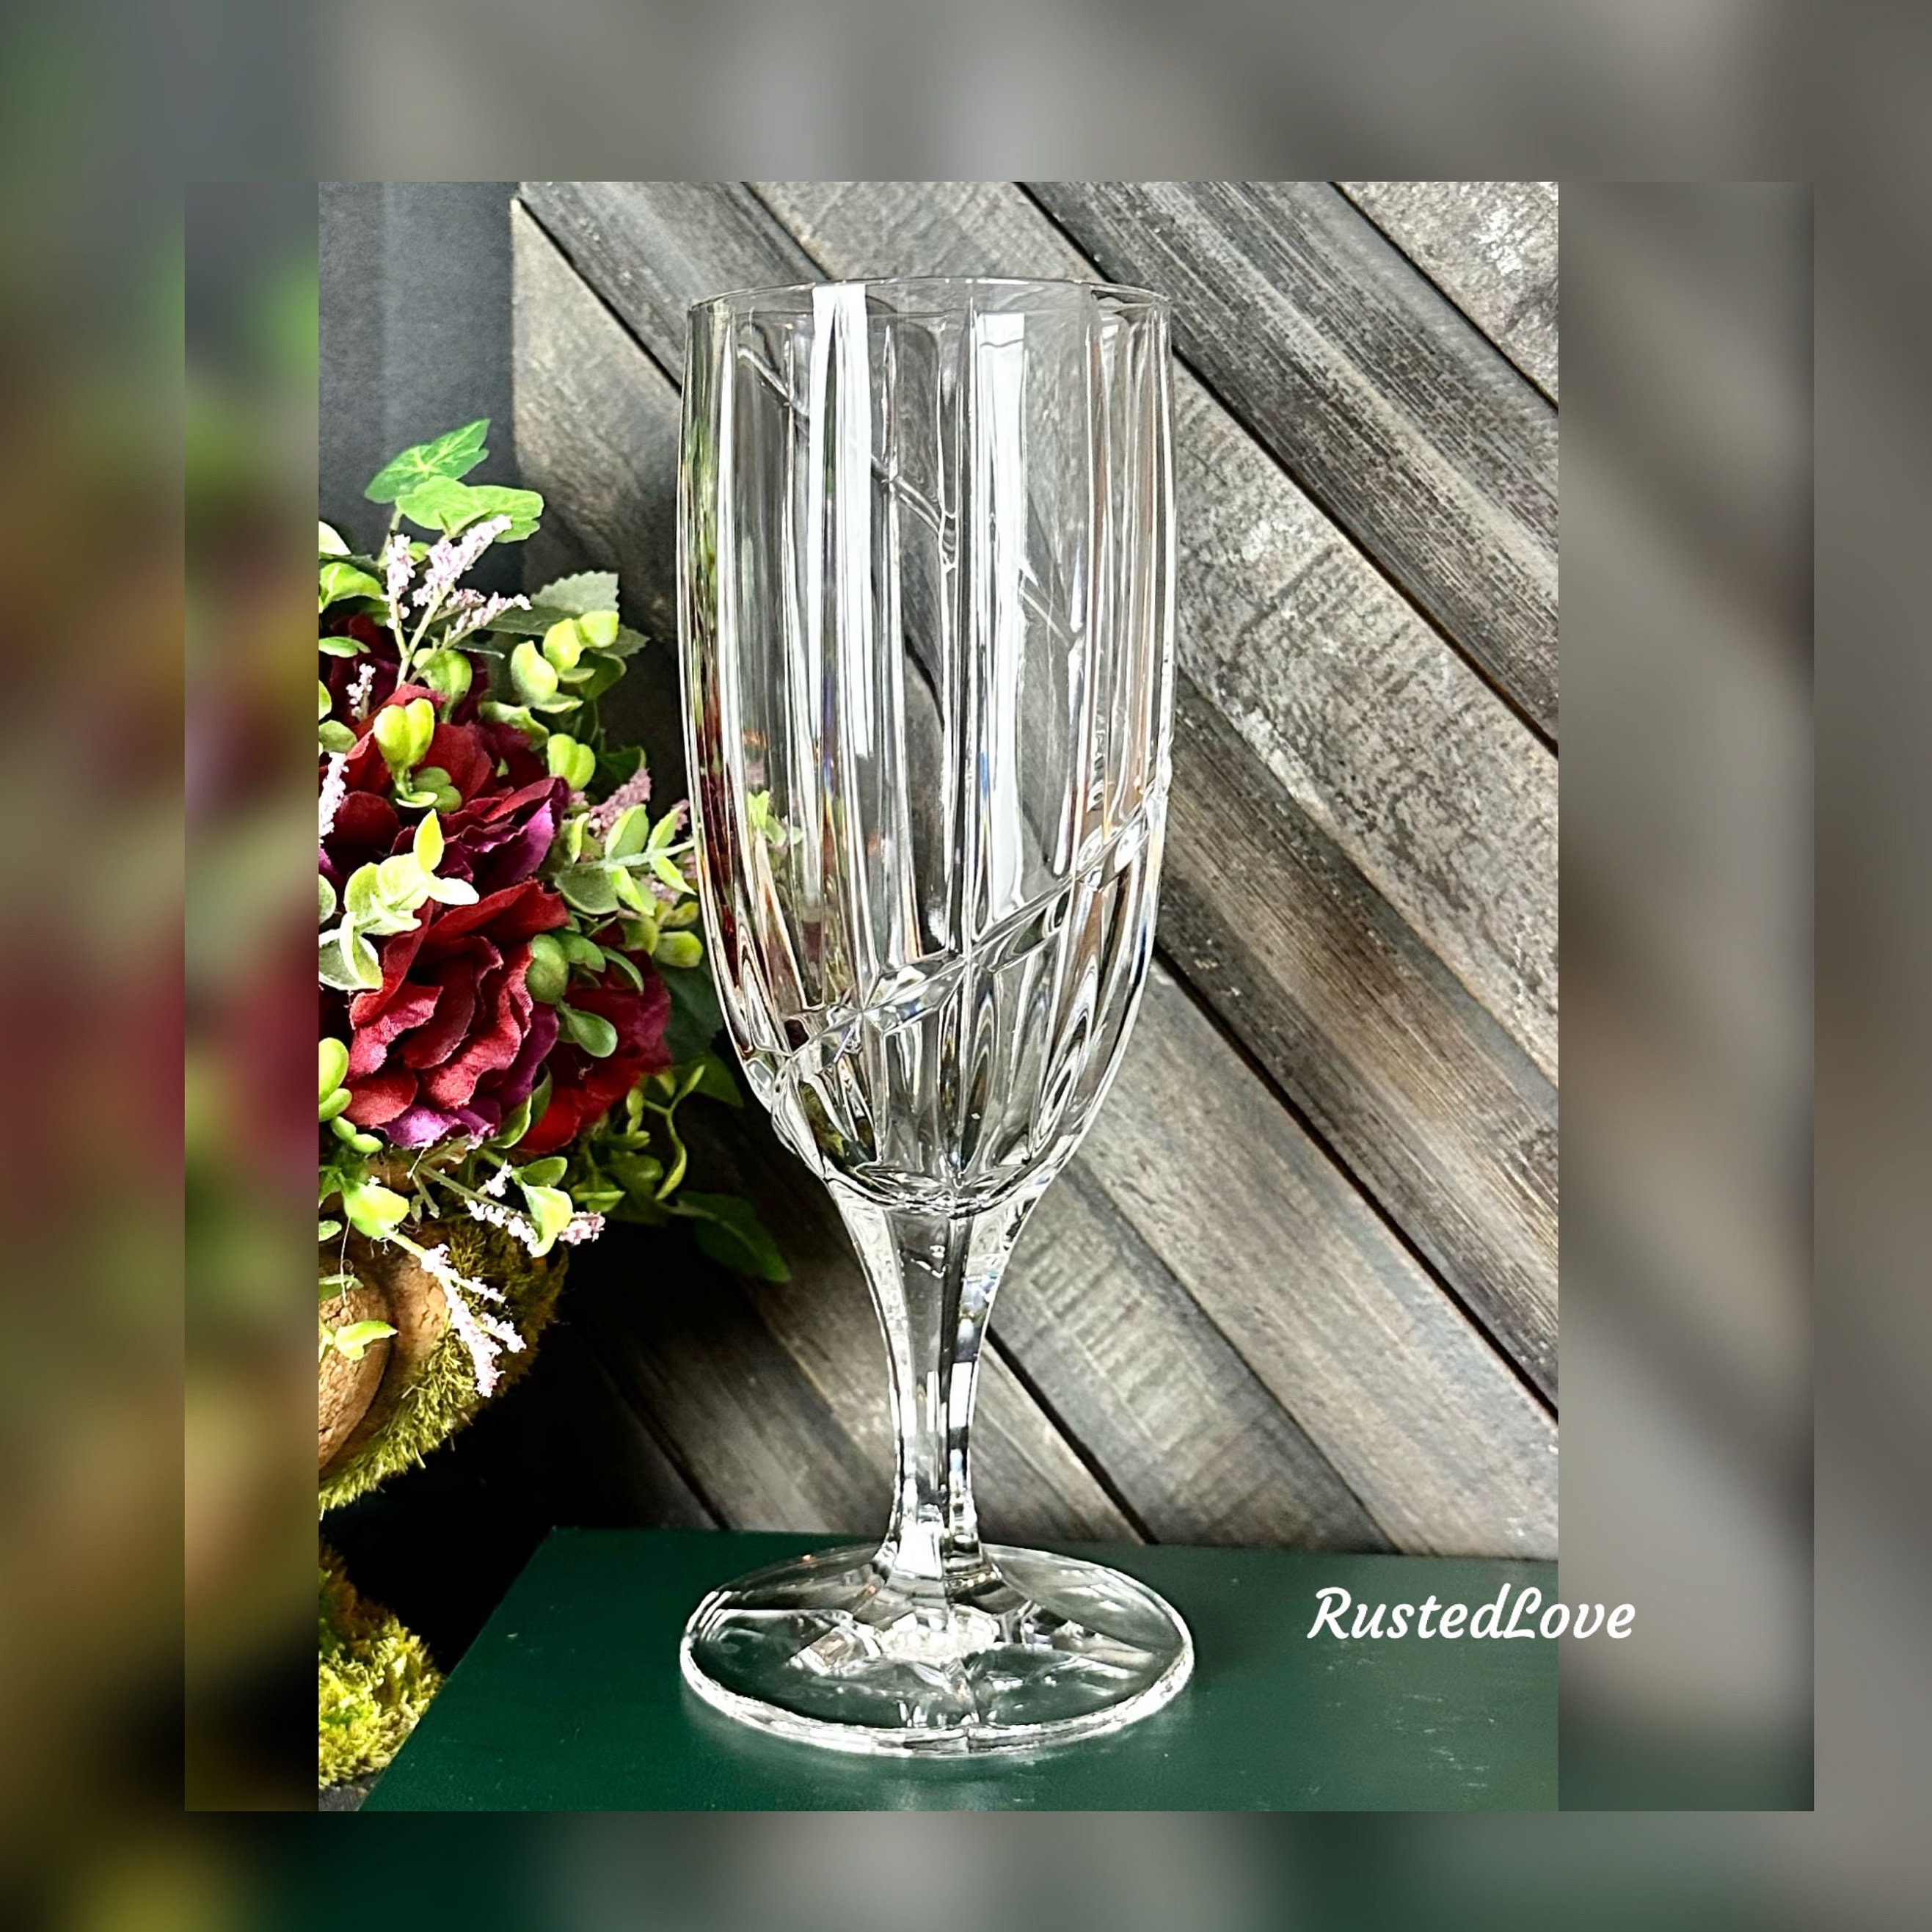 Crystal Champagne Glasses with Ball Stem. Enchantress by Mikasa